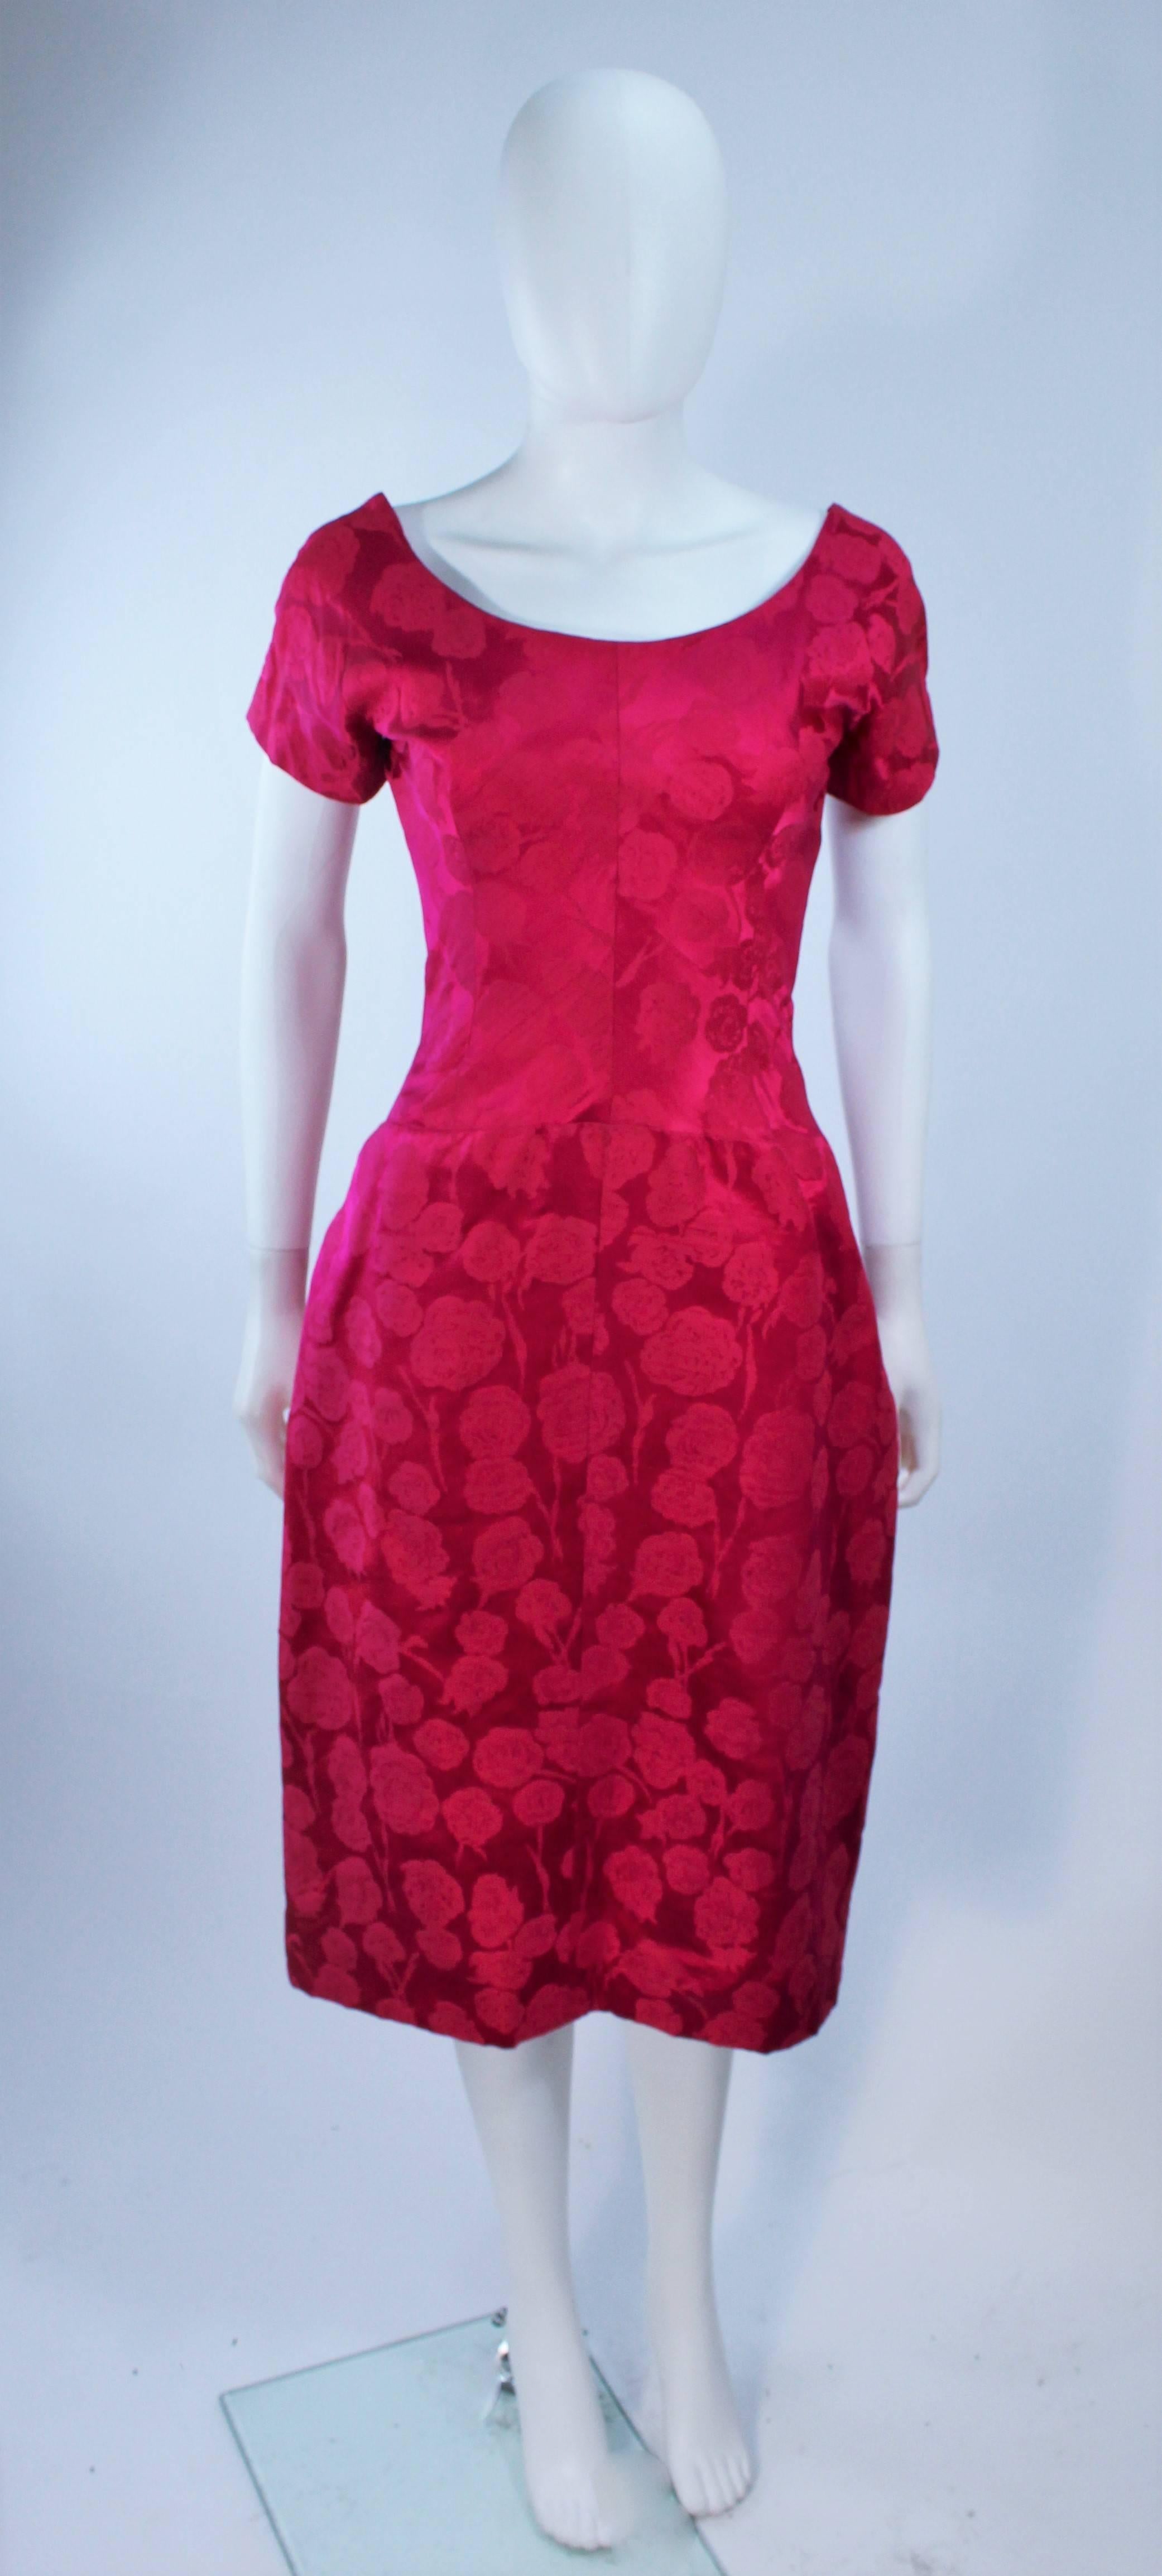 This RARE Schiaparelli attributed cocktail or day dress is composed of a pink silk Damask, with a floral print. 

The Label is missing from this dress and apparently tradectly lost when dry cleaned.

The dress does NOT have a zipper as you can see,